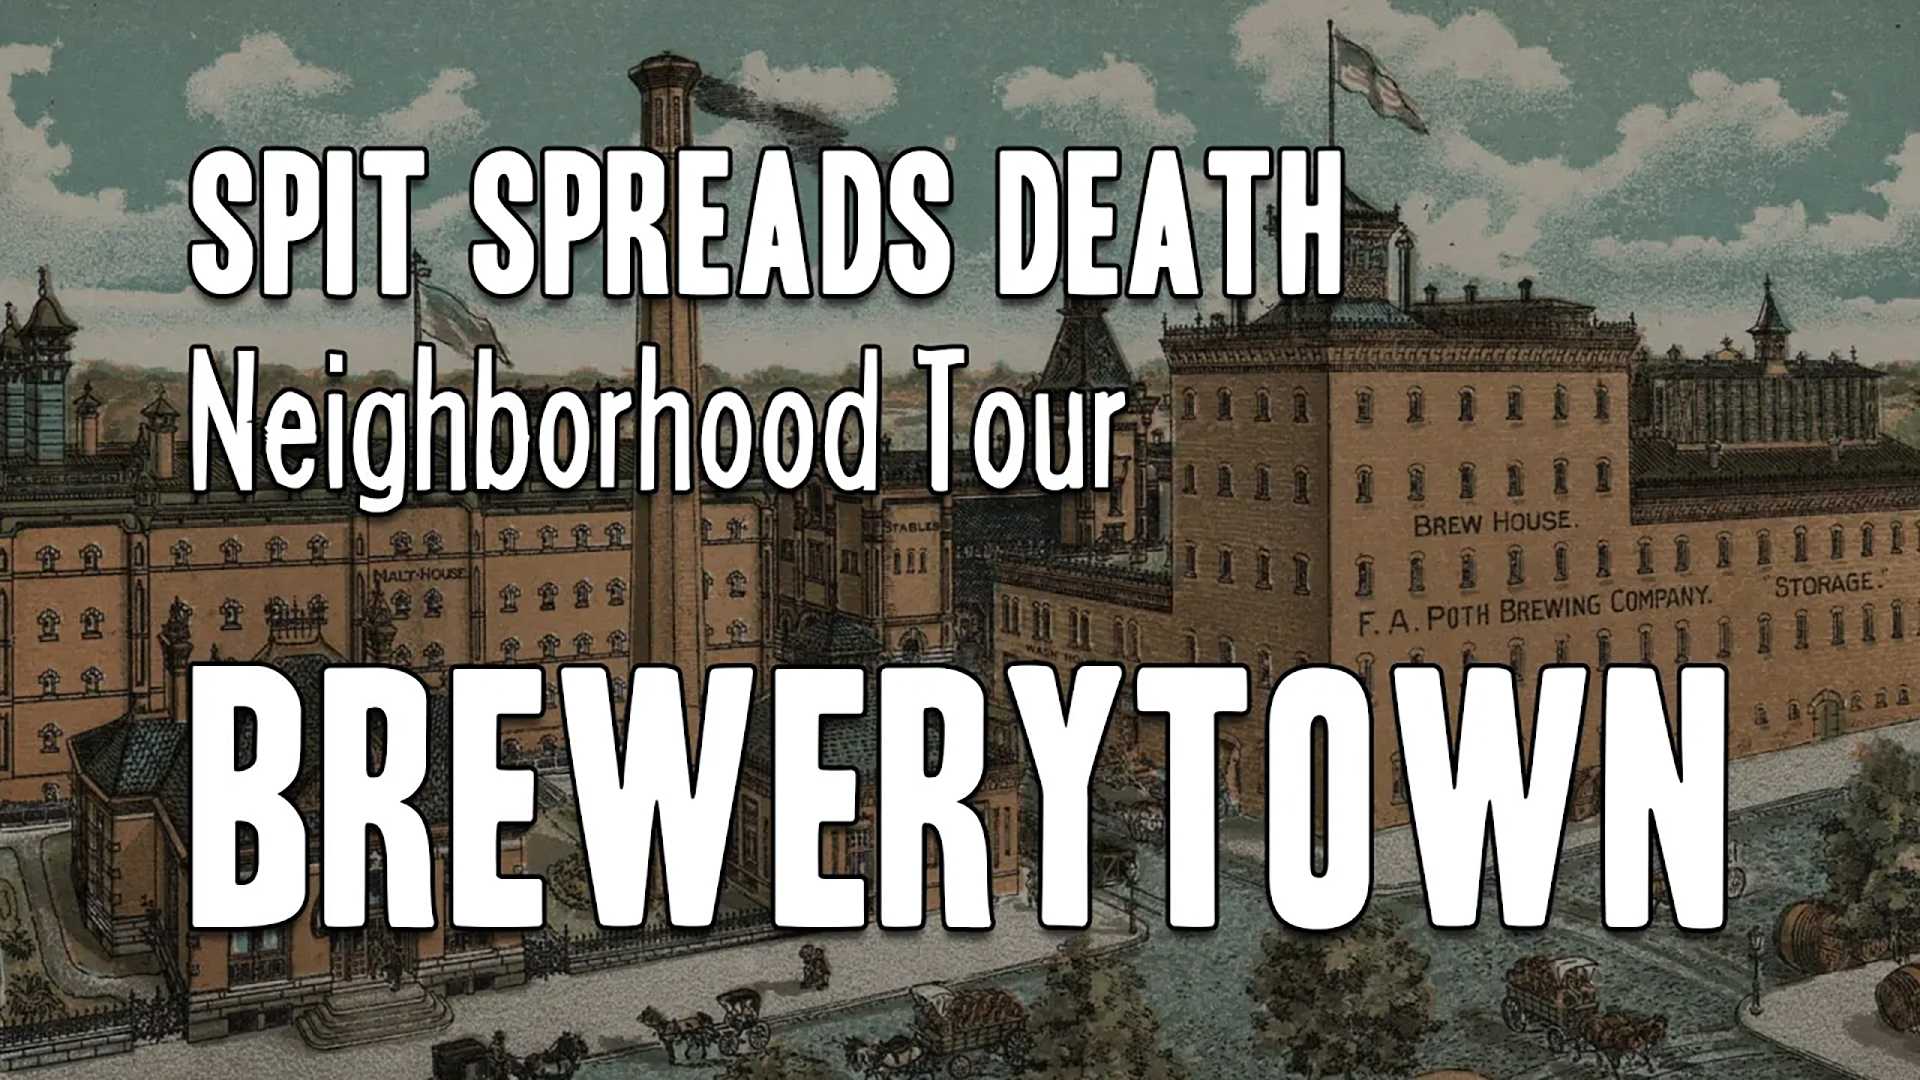 Text overlaid on top of a drawing of a 19th century factory that reads: "Spit Spreads Death Neighborhood Tour: Brewerytown"